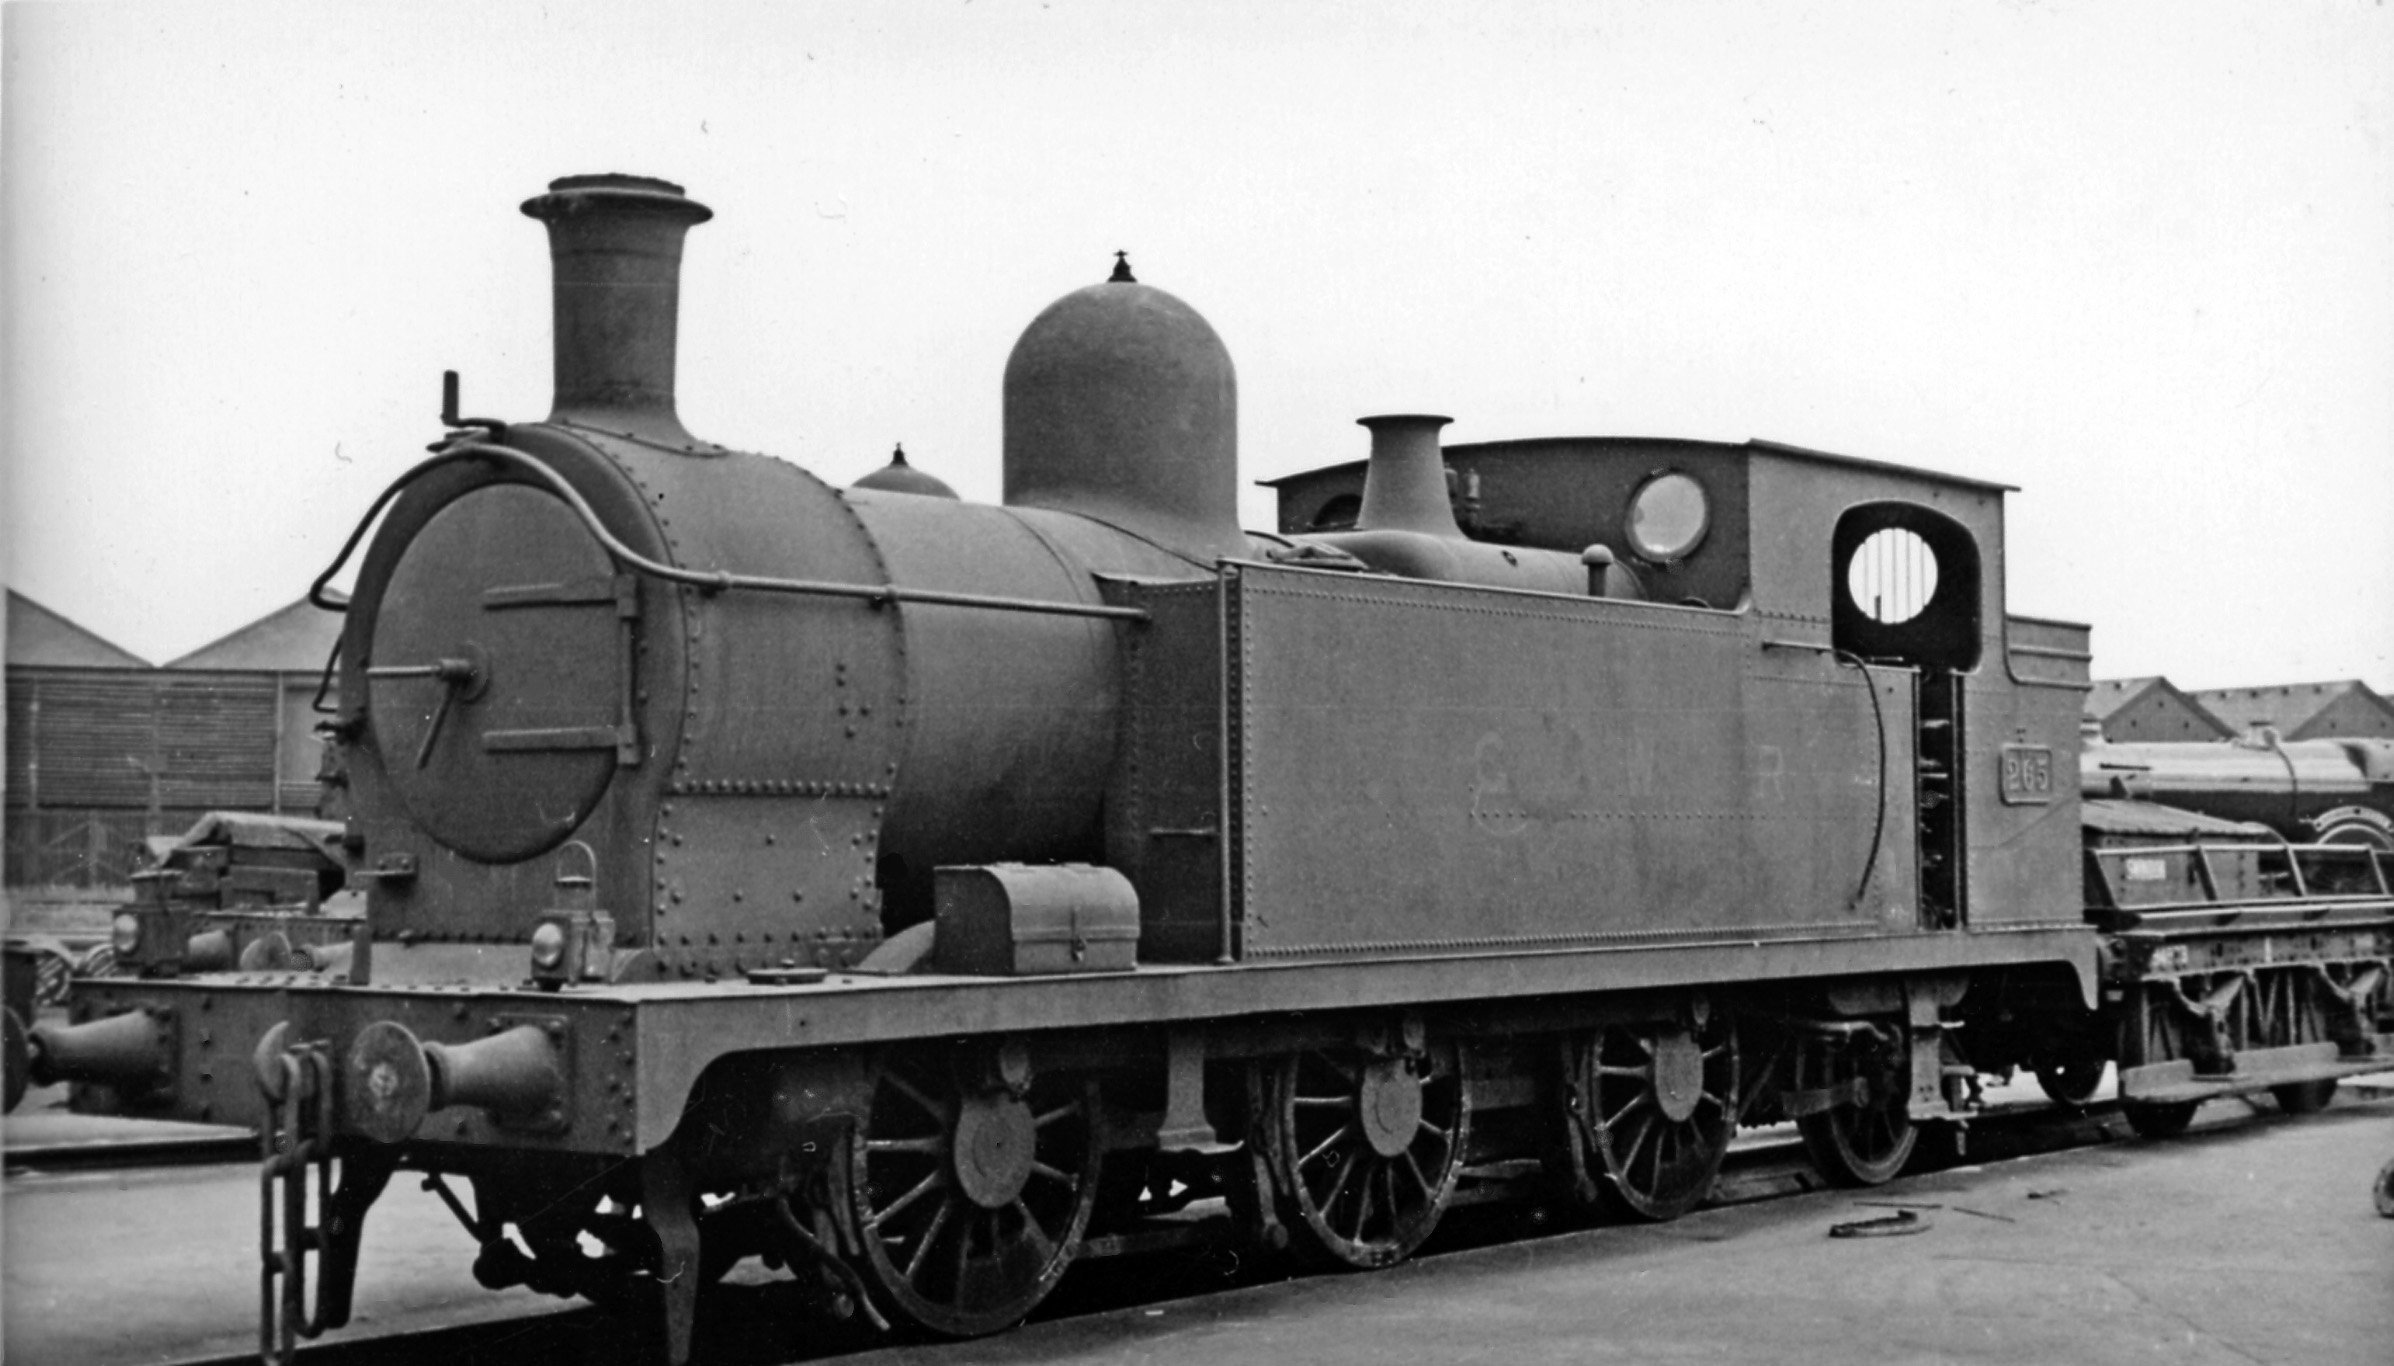 Barry B1 Class in faded livery